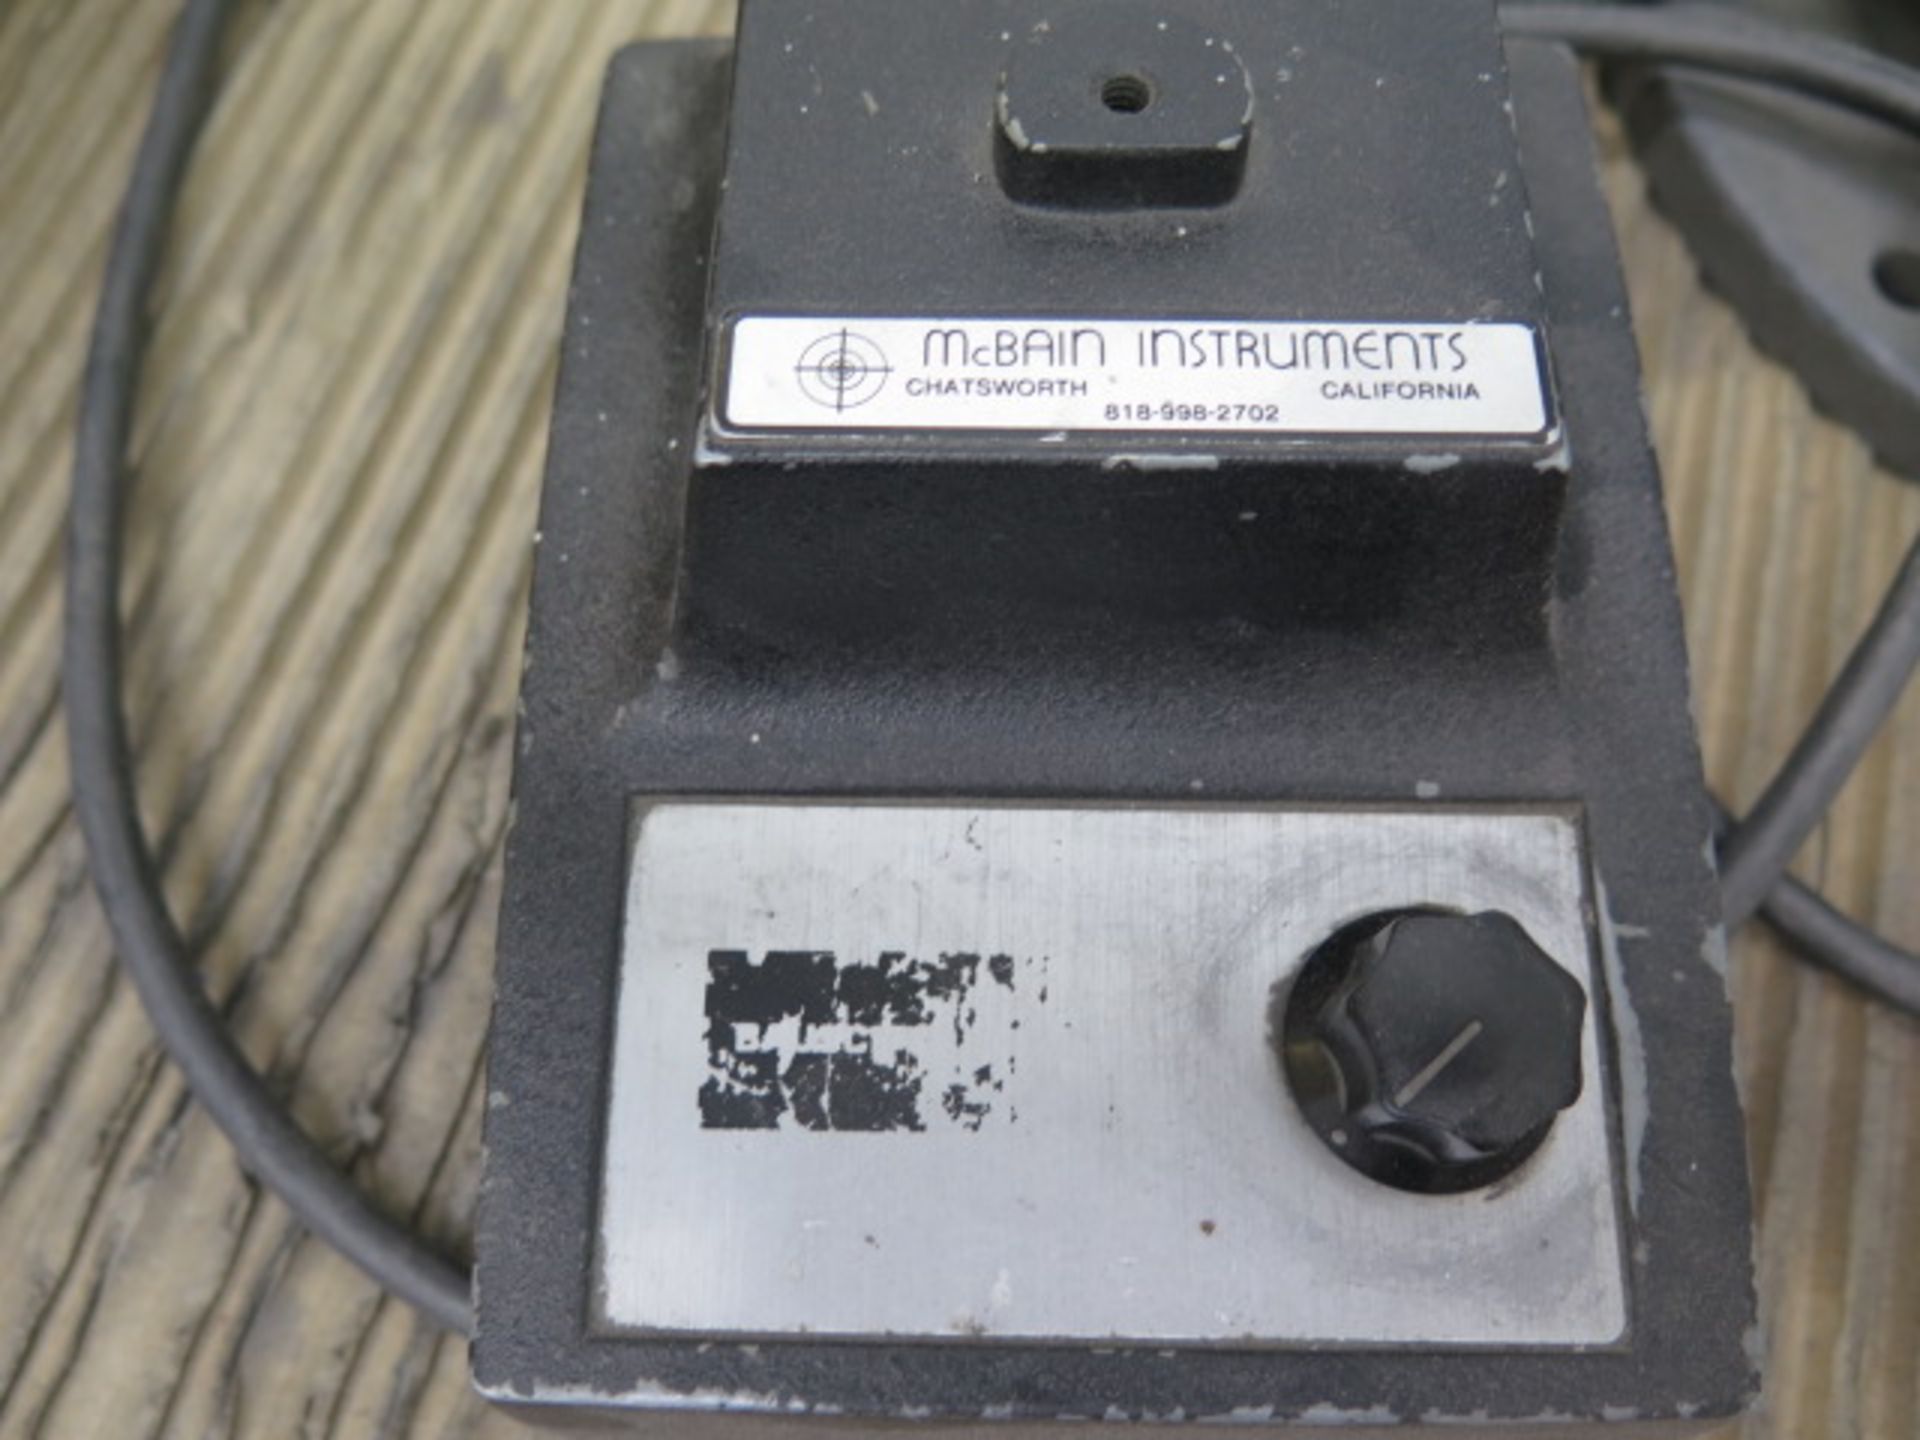 Stereo Microscope w/ Light Source (SOLD AS-IS - NO WARRANTY) - Image 6 of 6